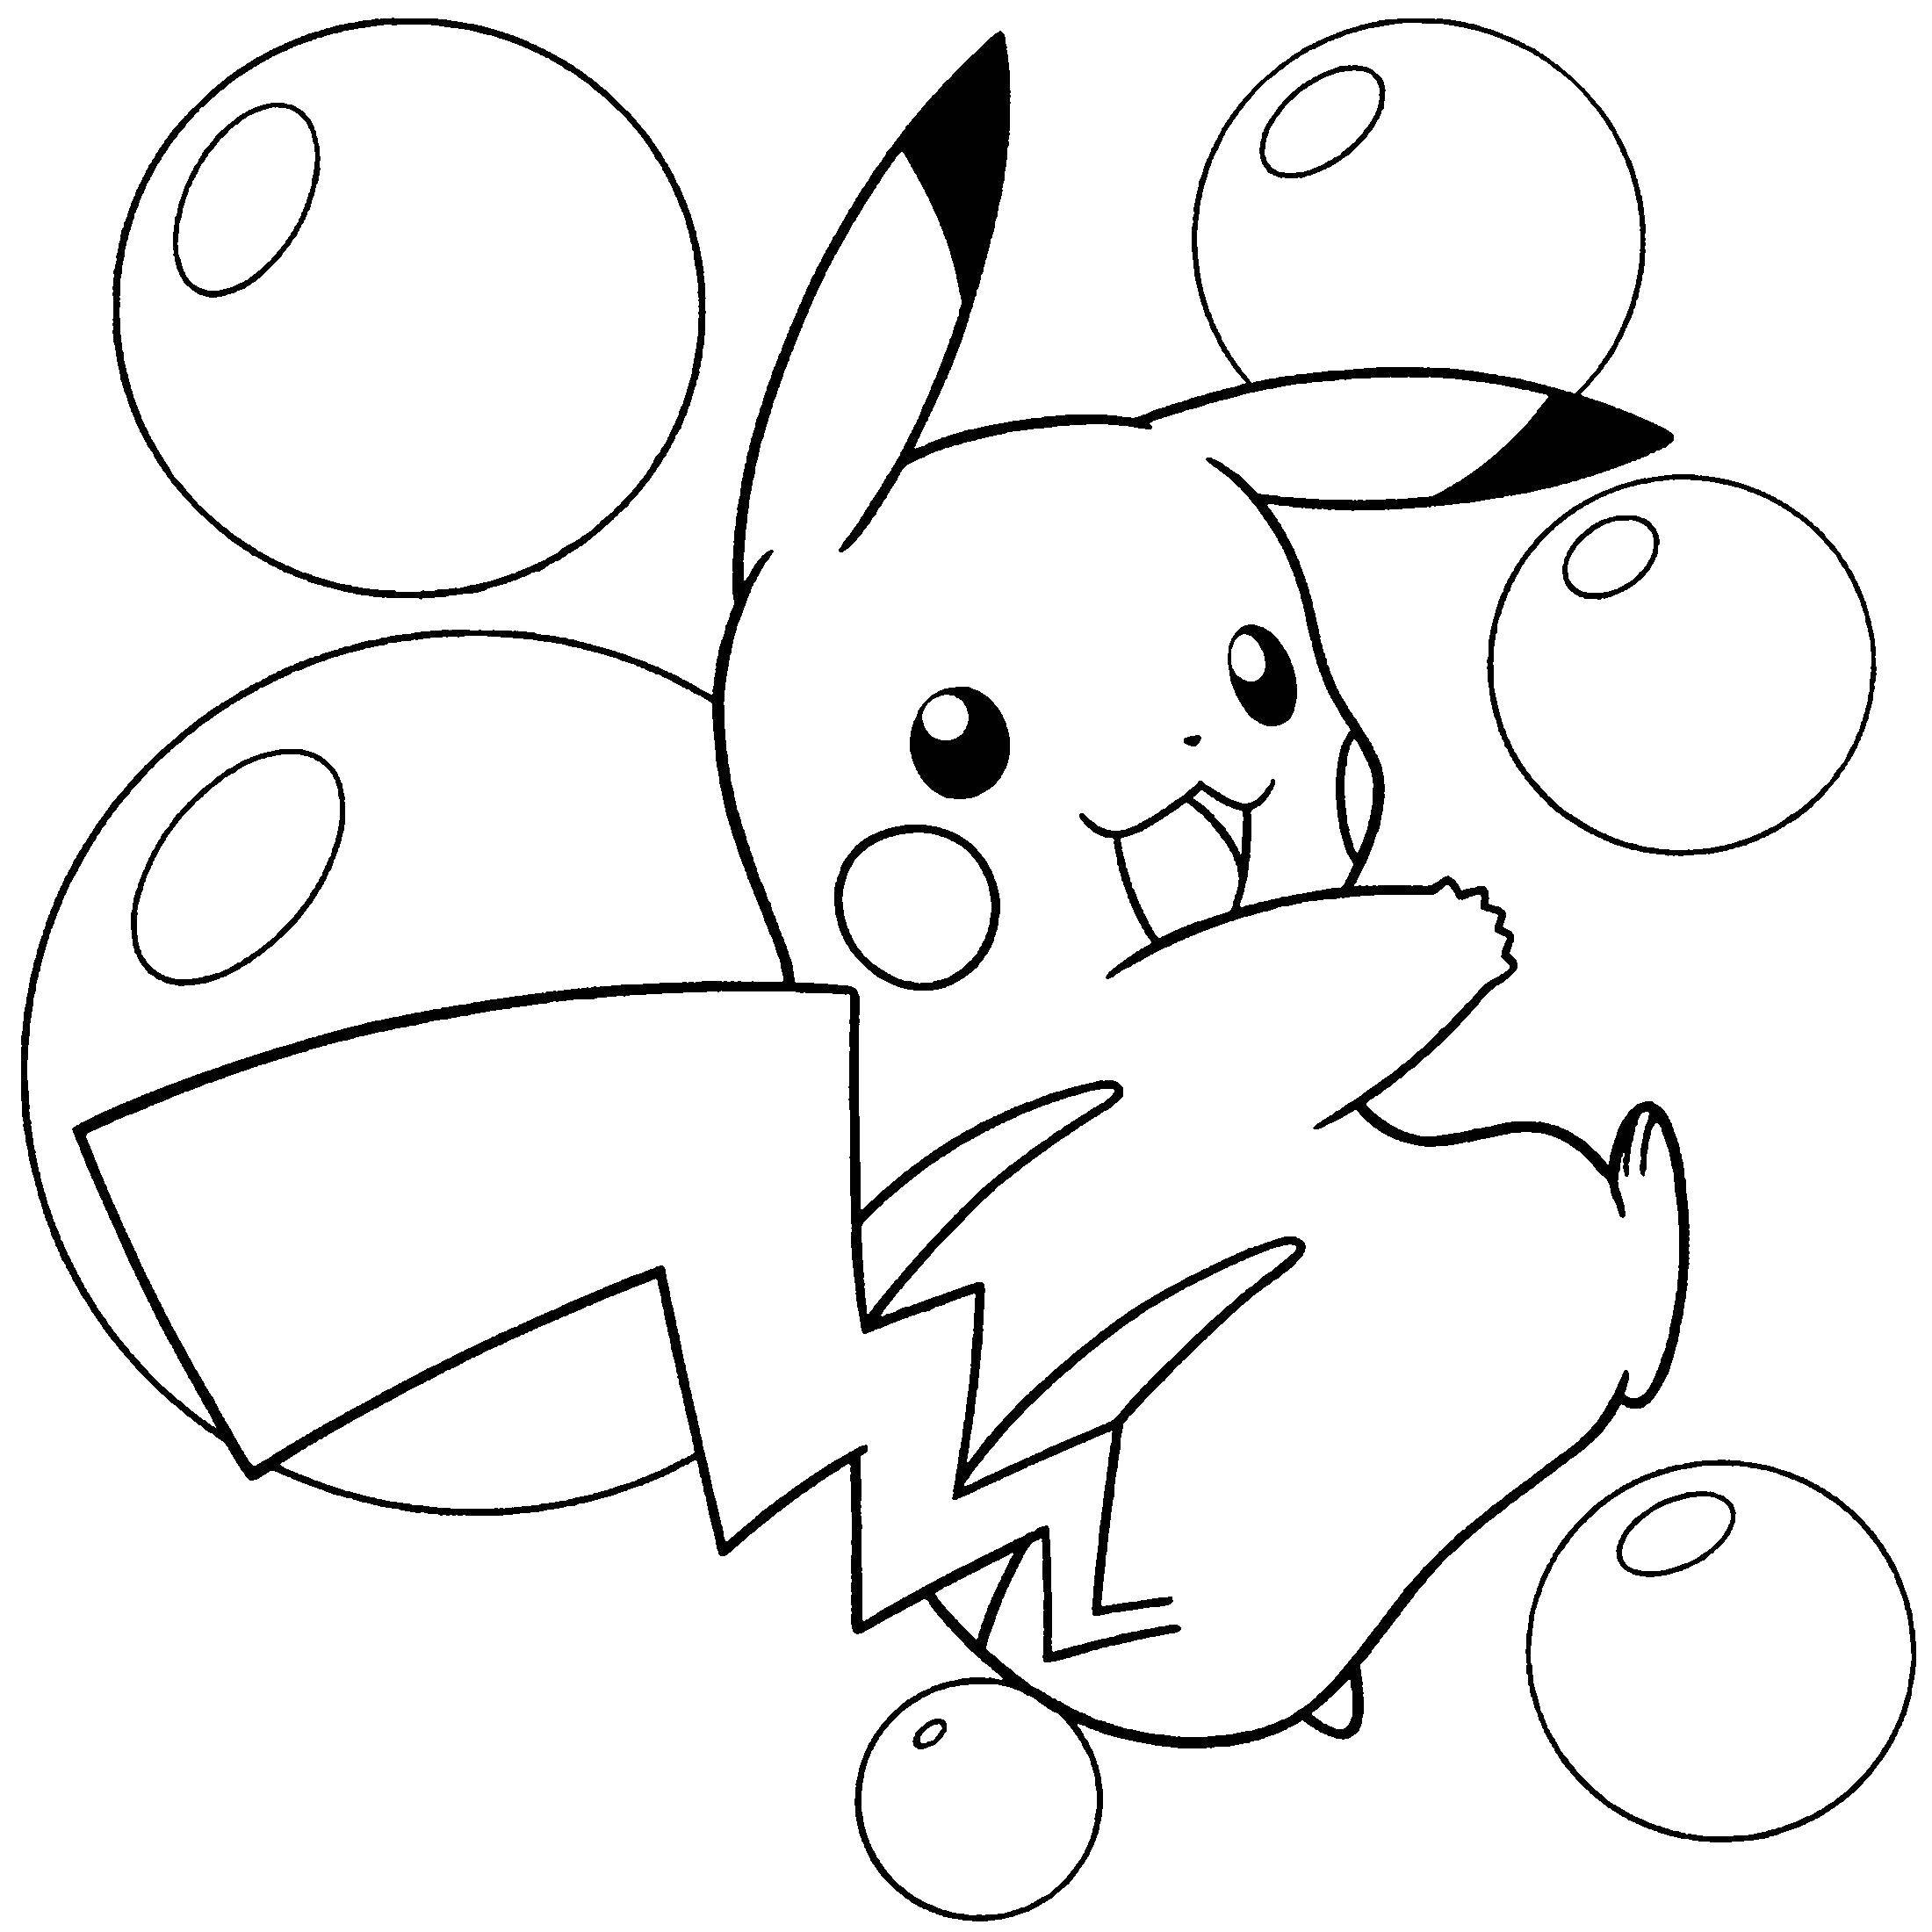 Coloring Pikachu in the bubbles. Category Pokemon. Tags:  Pokemon.